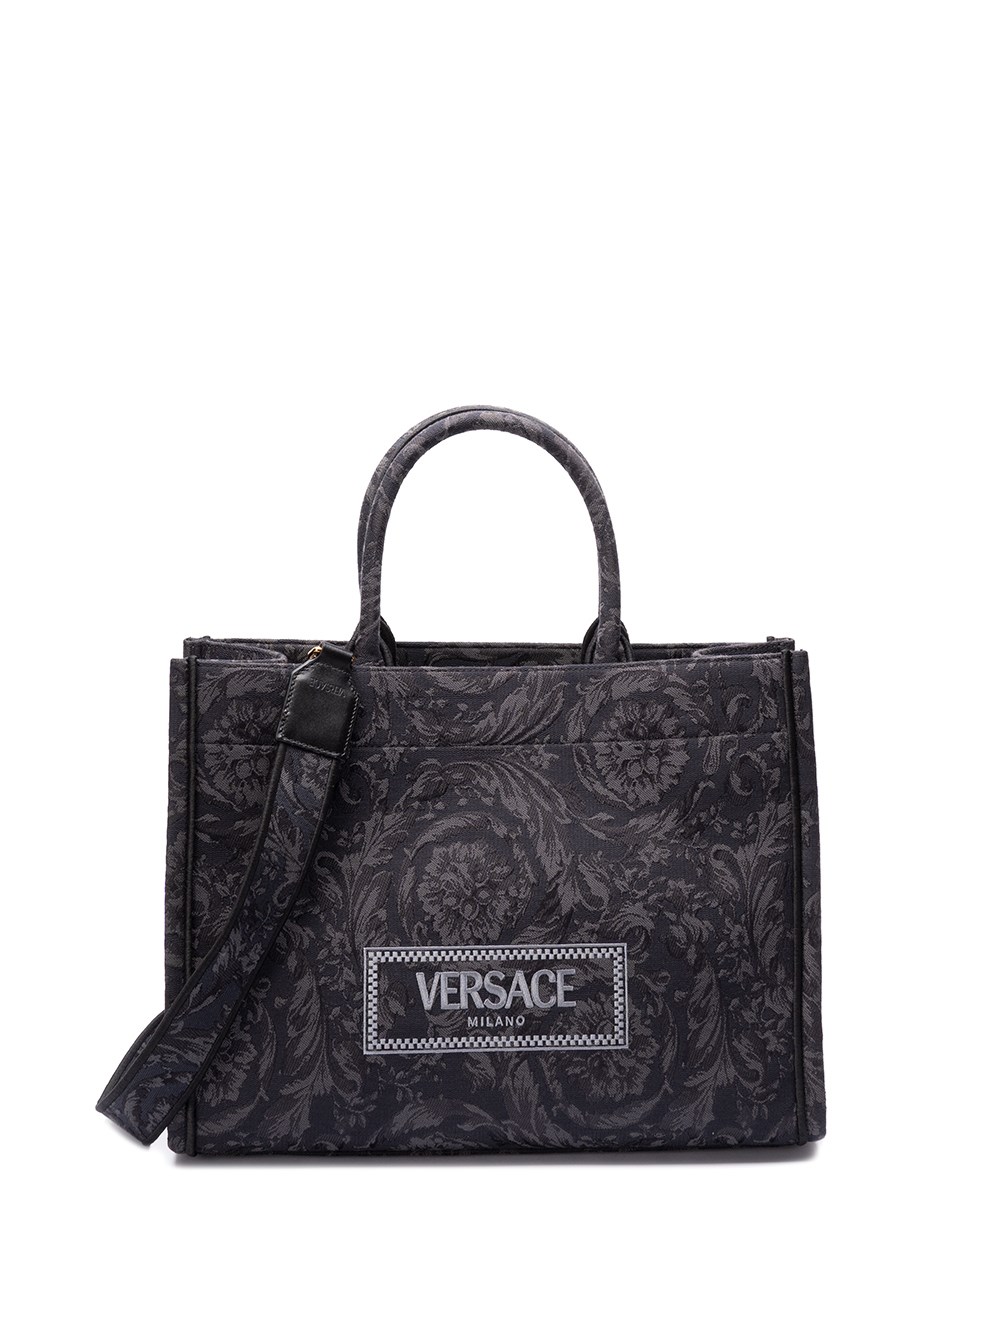 Versace Embroidered Large Tote Bag In Black  